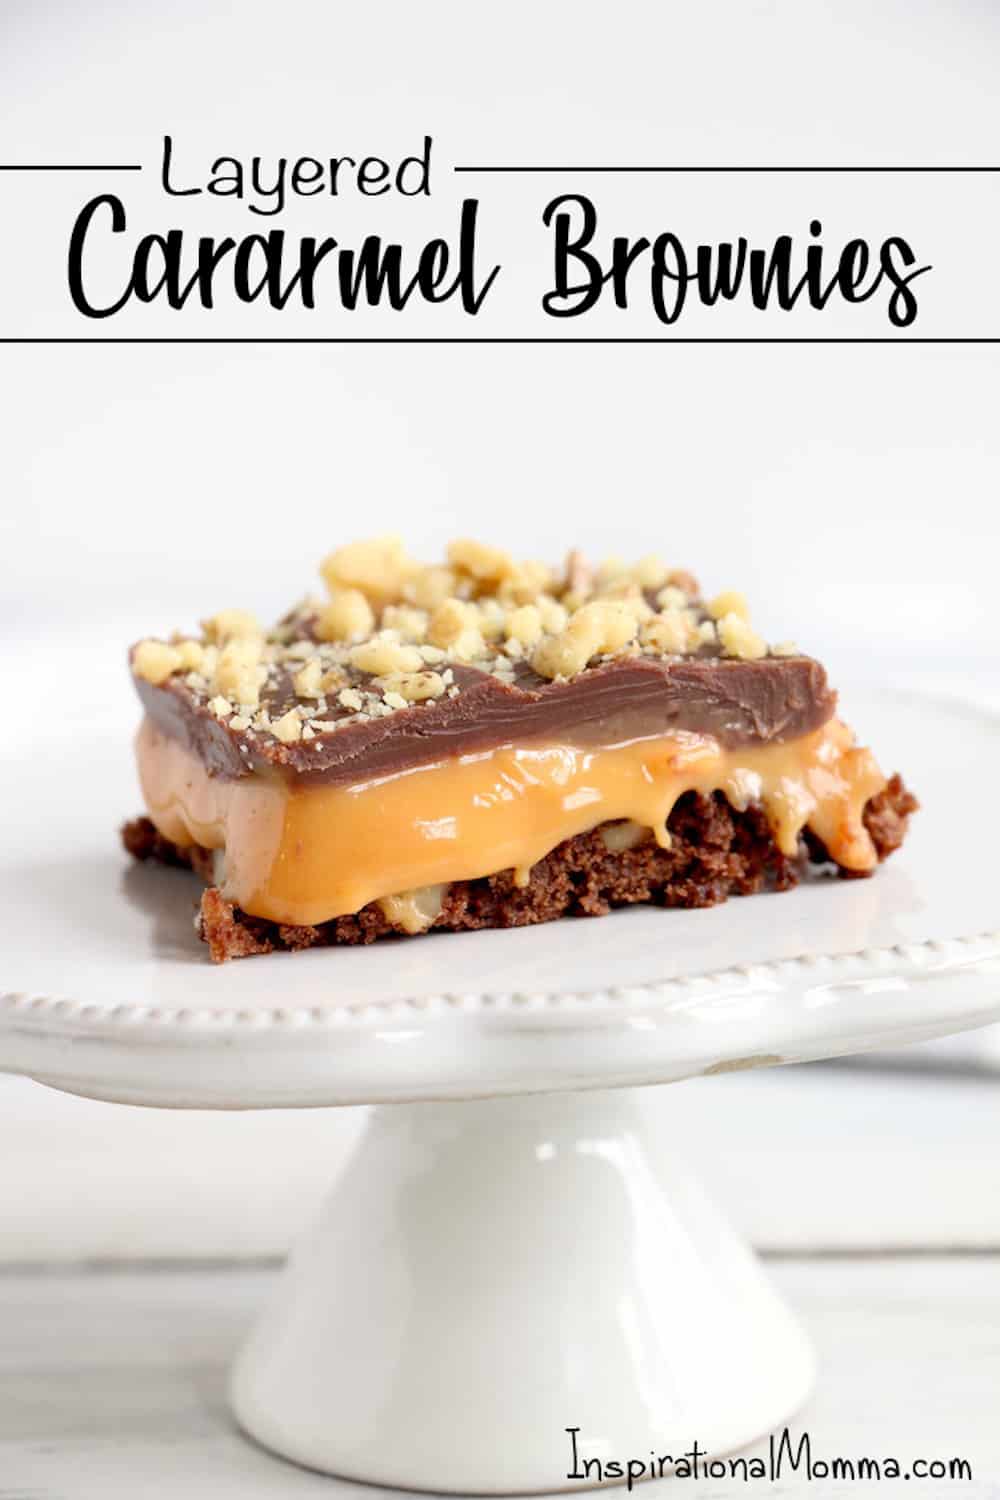 These Layered Caramel Brownies have it all. A chewy brownie crust and a gooey caramel middle, all finished off with a milk chocolatey top! #inspirationalmomma #caramelbrownies #layered #dessert #desserts #recipe #caramel #chocolate #brownies